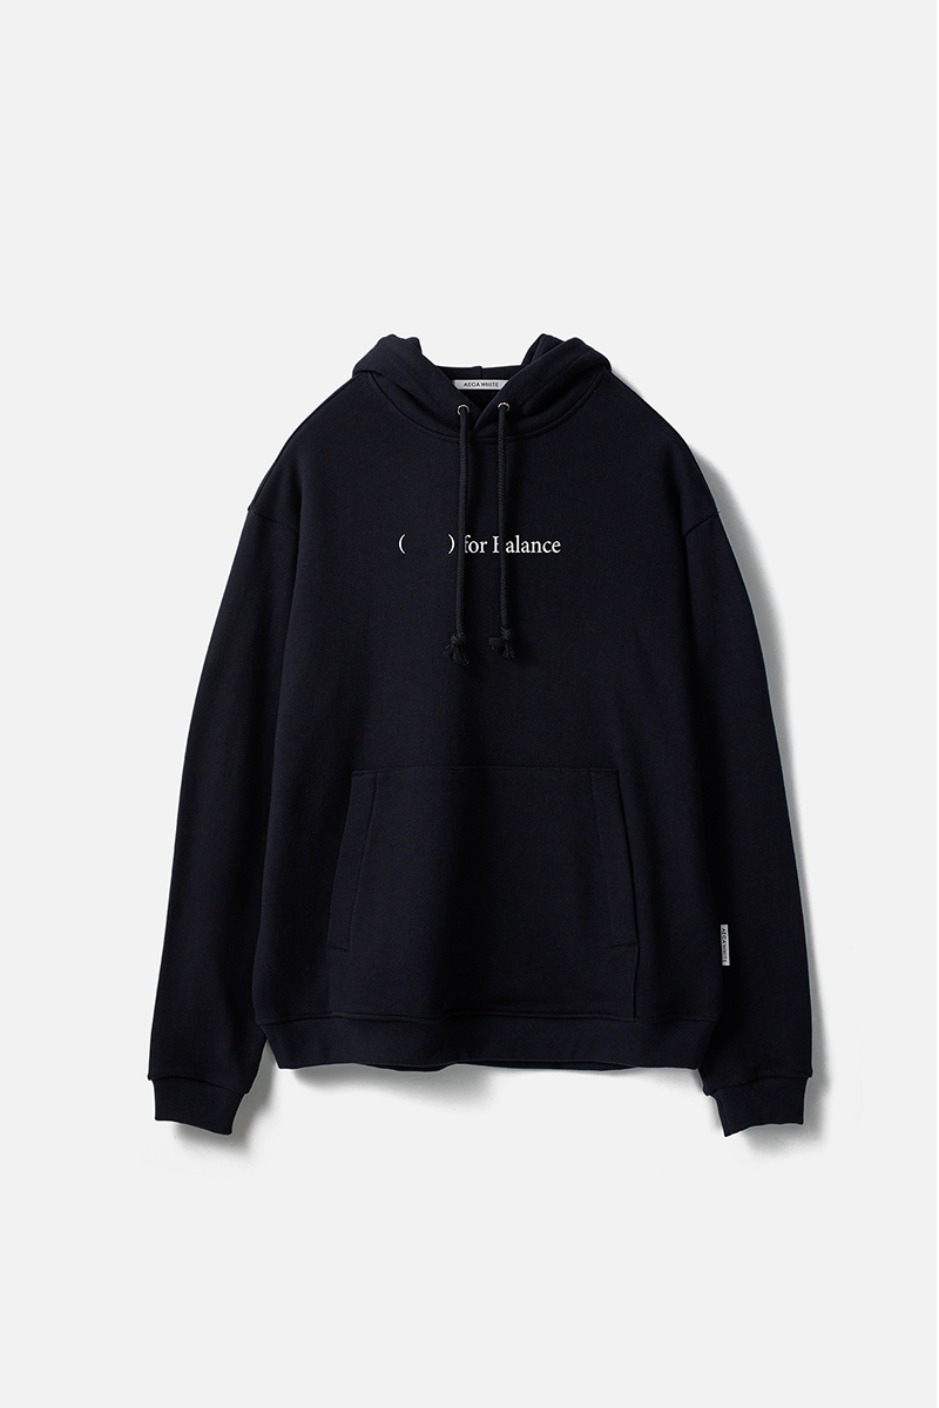 FOR BALANCE PULLOVER HOODIE-NAVY